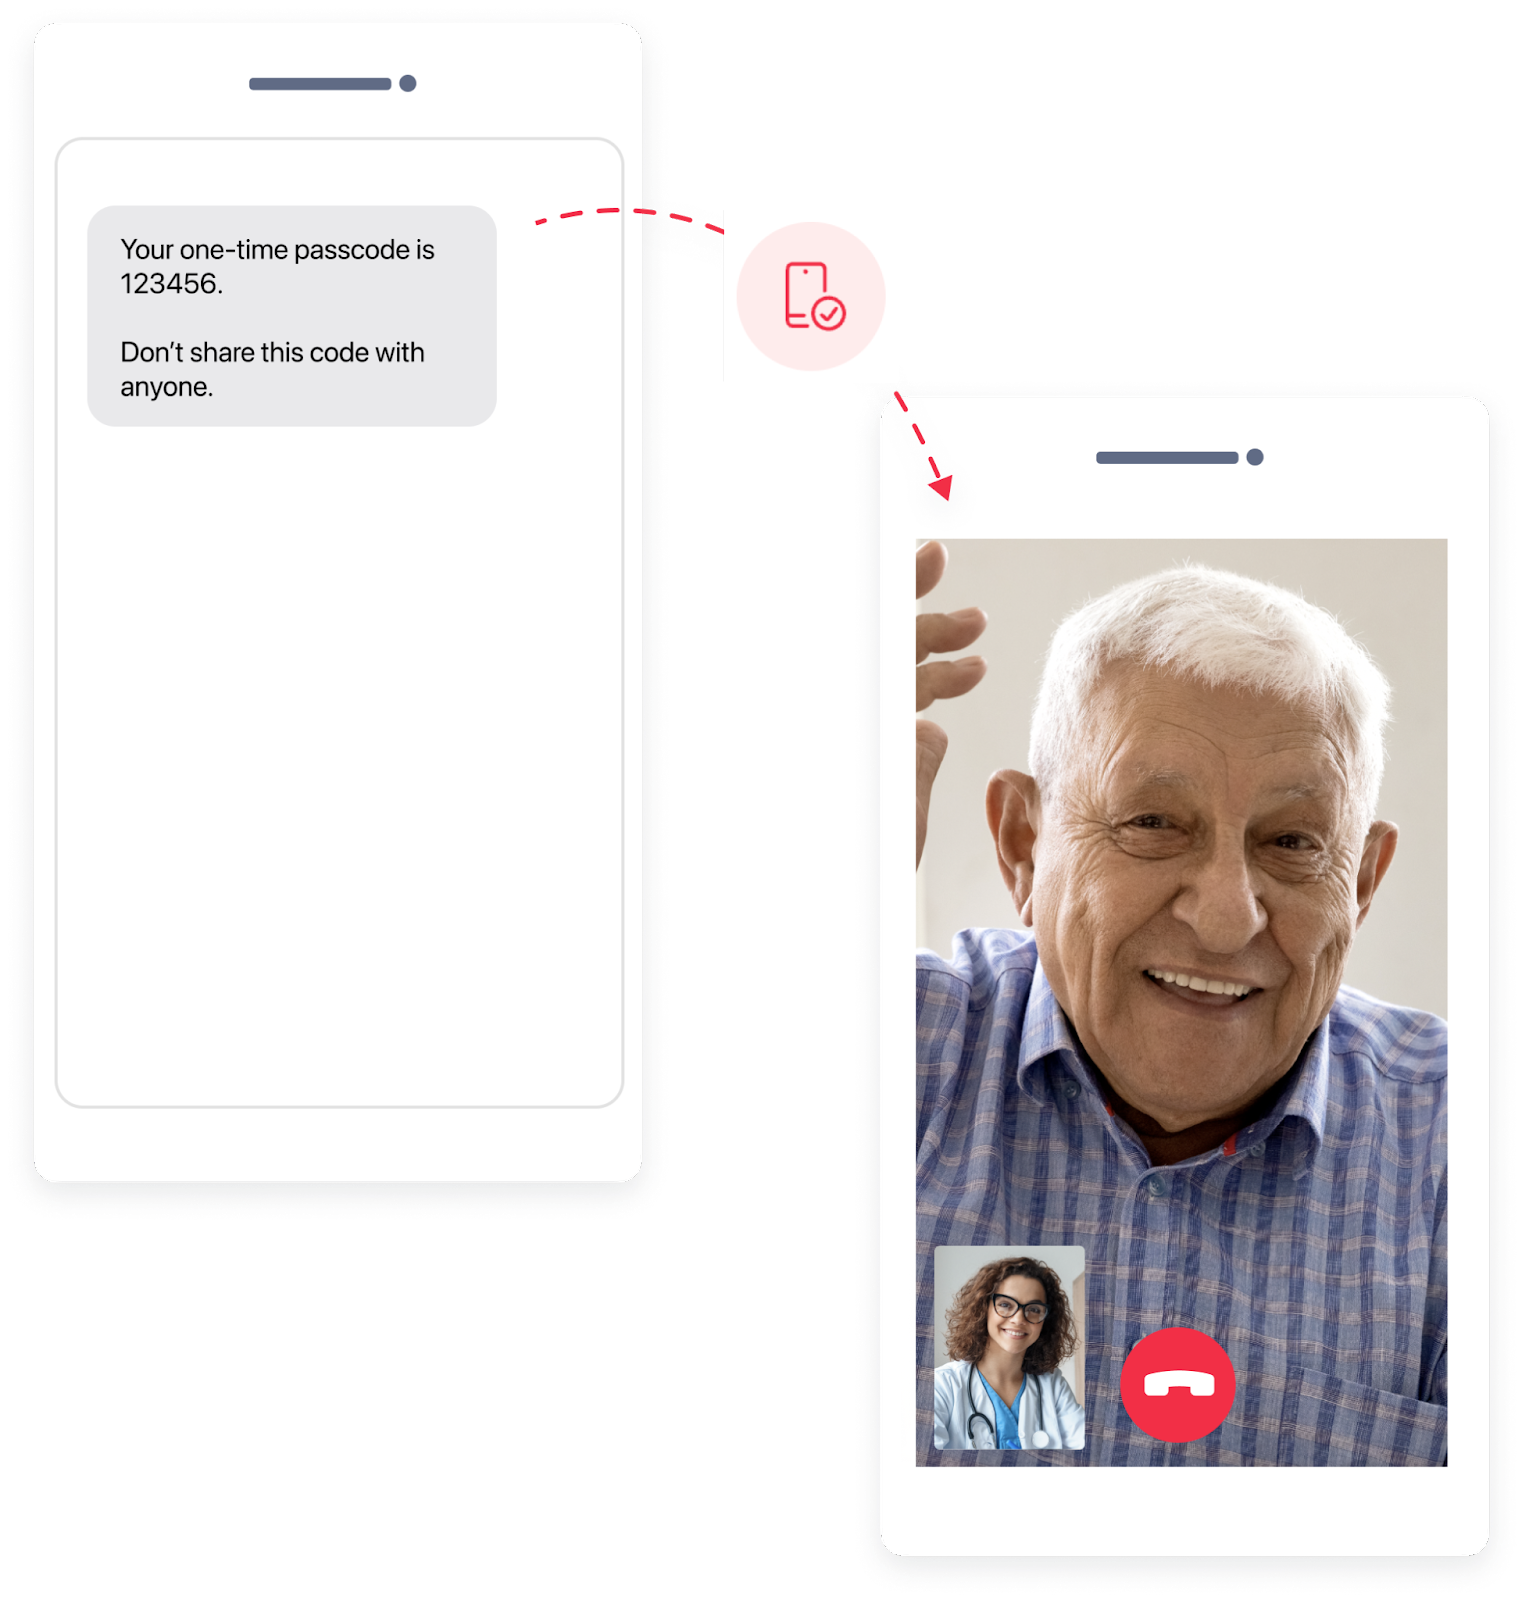 Twilio healthcare with one-time passcode